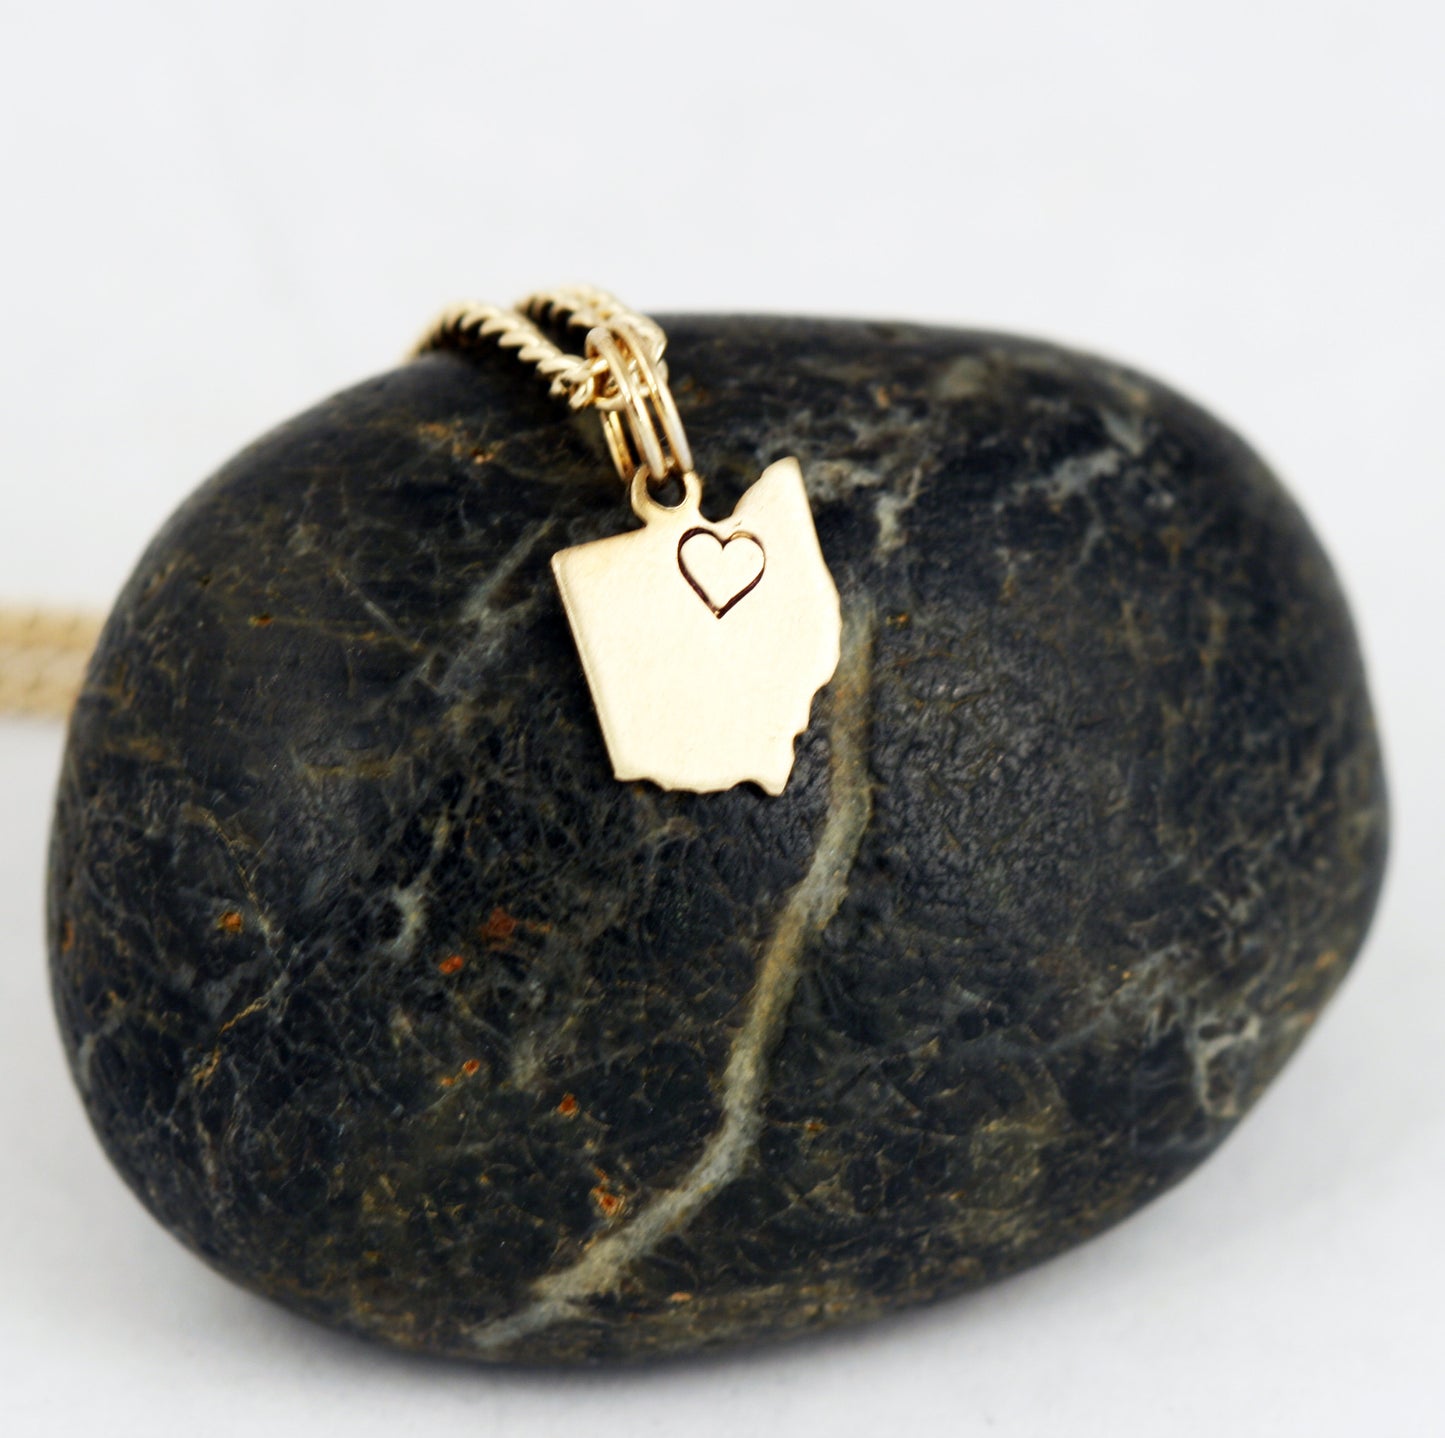 Small Gold Ohio Charm Necklace